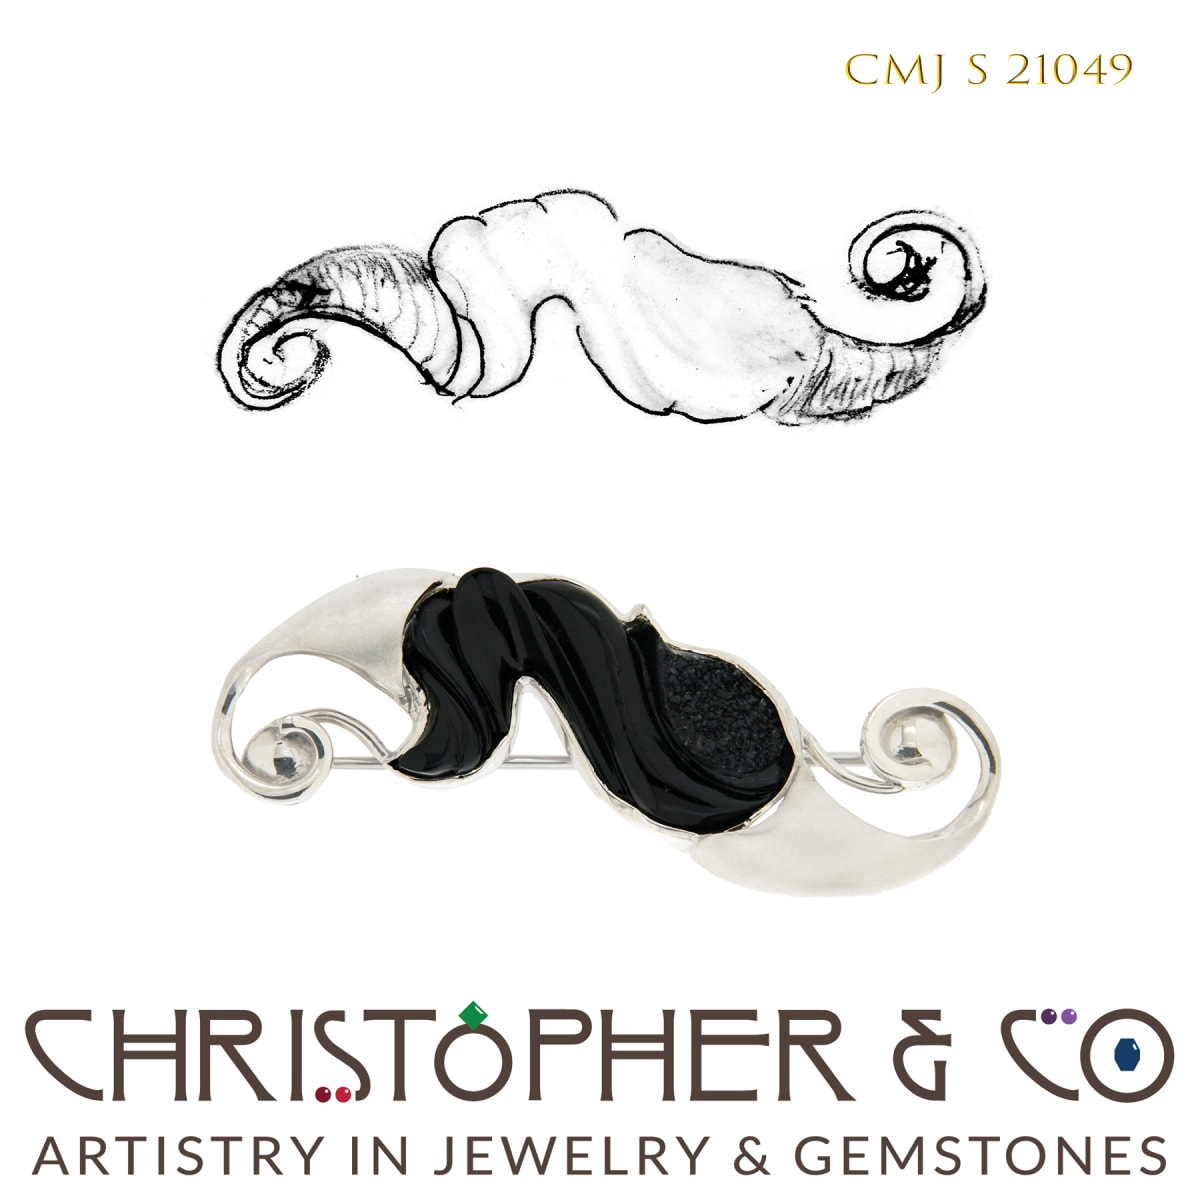 CMJ S 21050 White Gold Brooch by Christopher M. Jupp set with Black Onyx Drusy carved by Darryl Alexander  Image: CMJ S 21050 White Gold Brooch by Christopher M. Jupp set with Black Onyx Drusy carved by Darryl Alexander